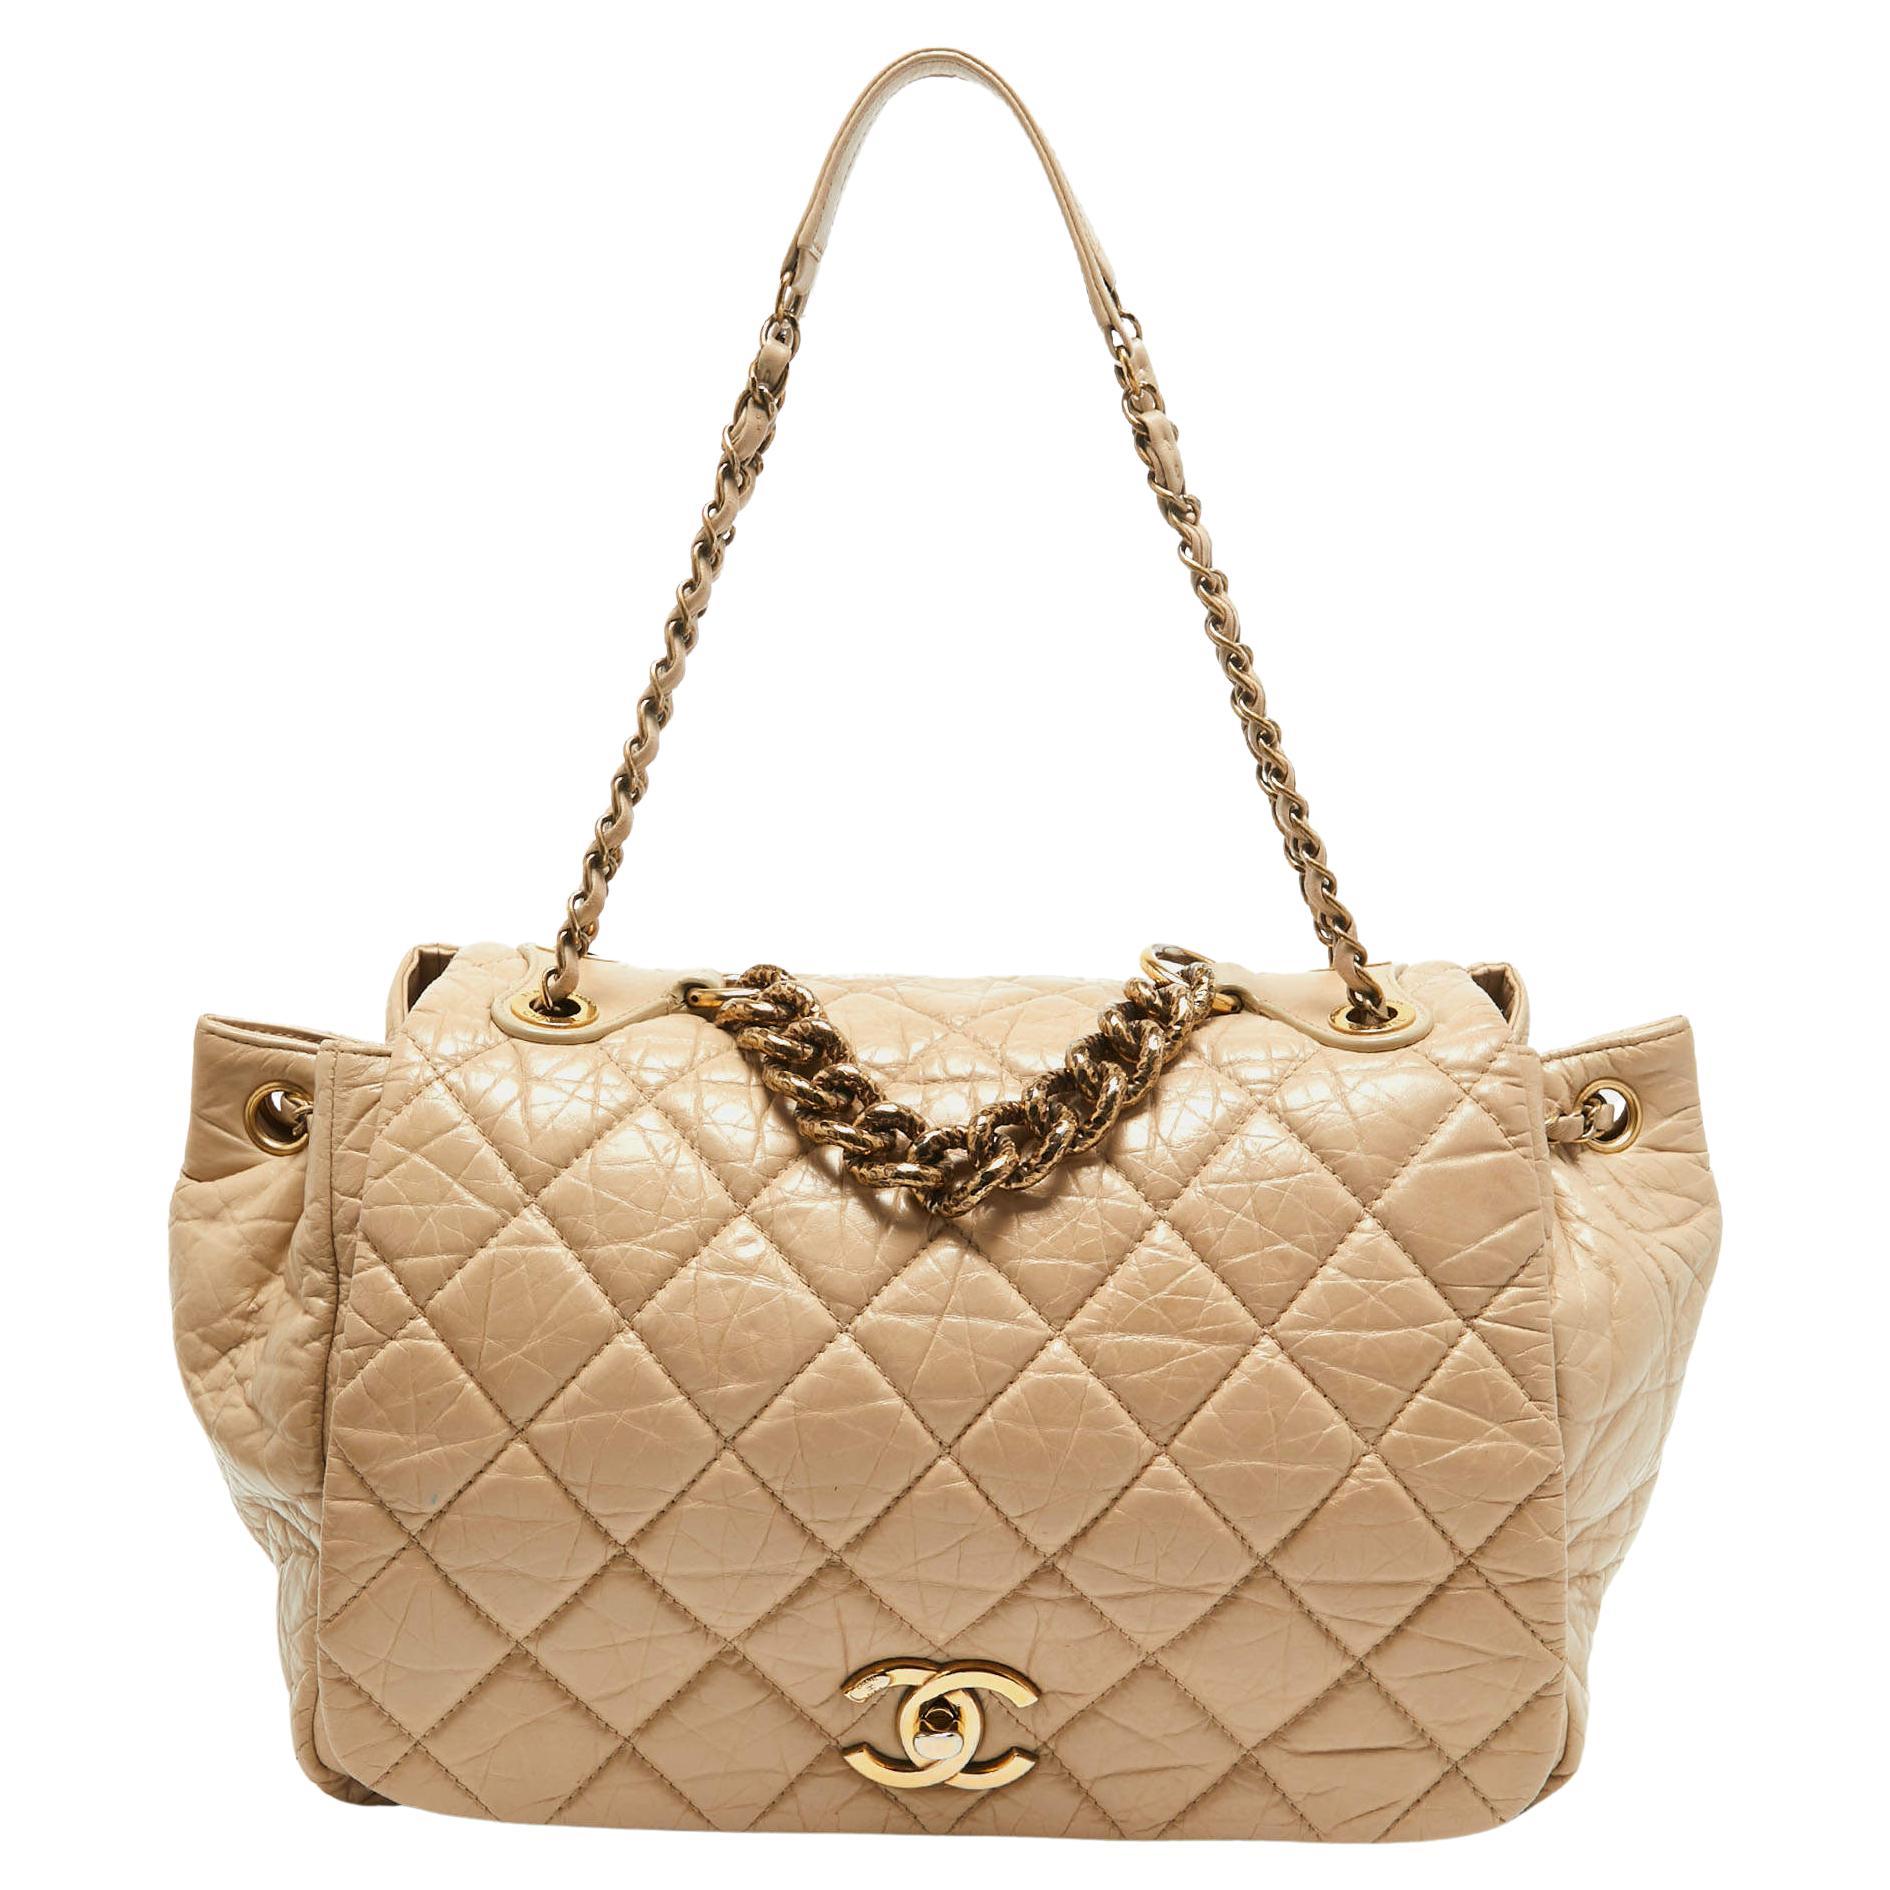 Chanel Beige Quilted Aged Leather Pondicherry Flap Bag For Sale